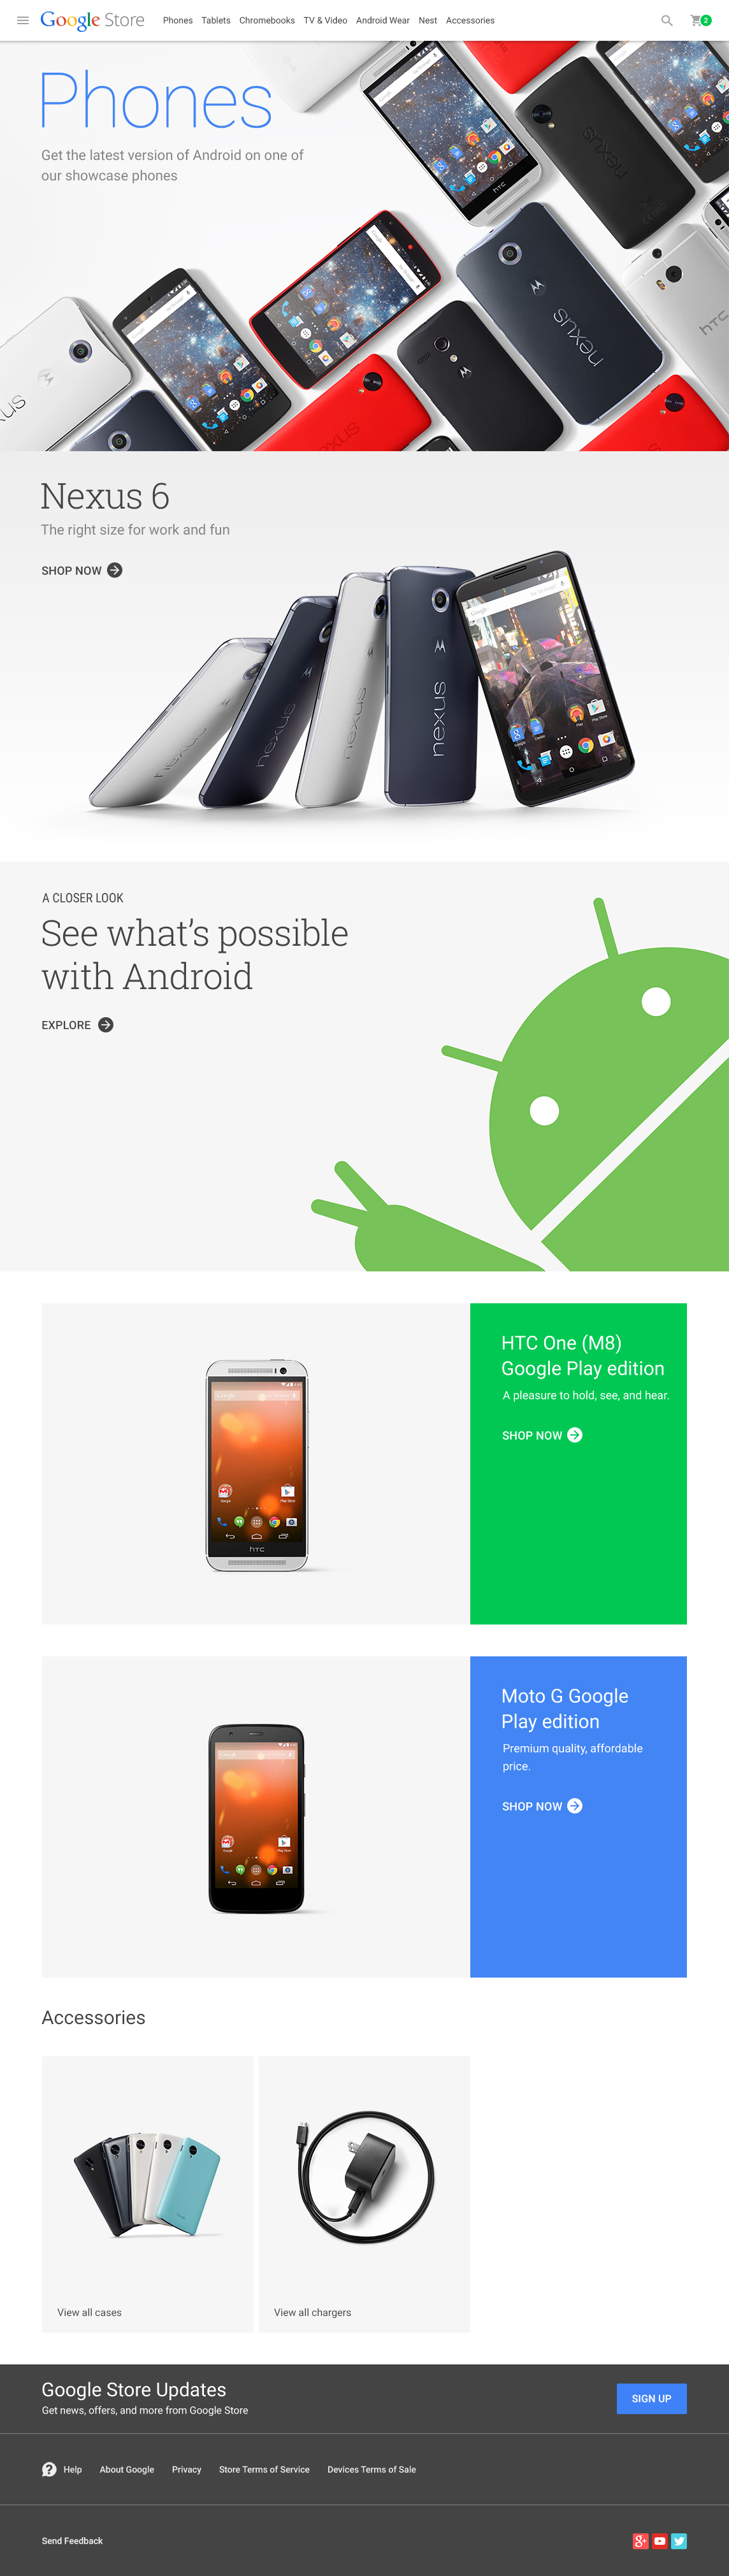 Android Phones Category Page